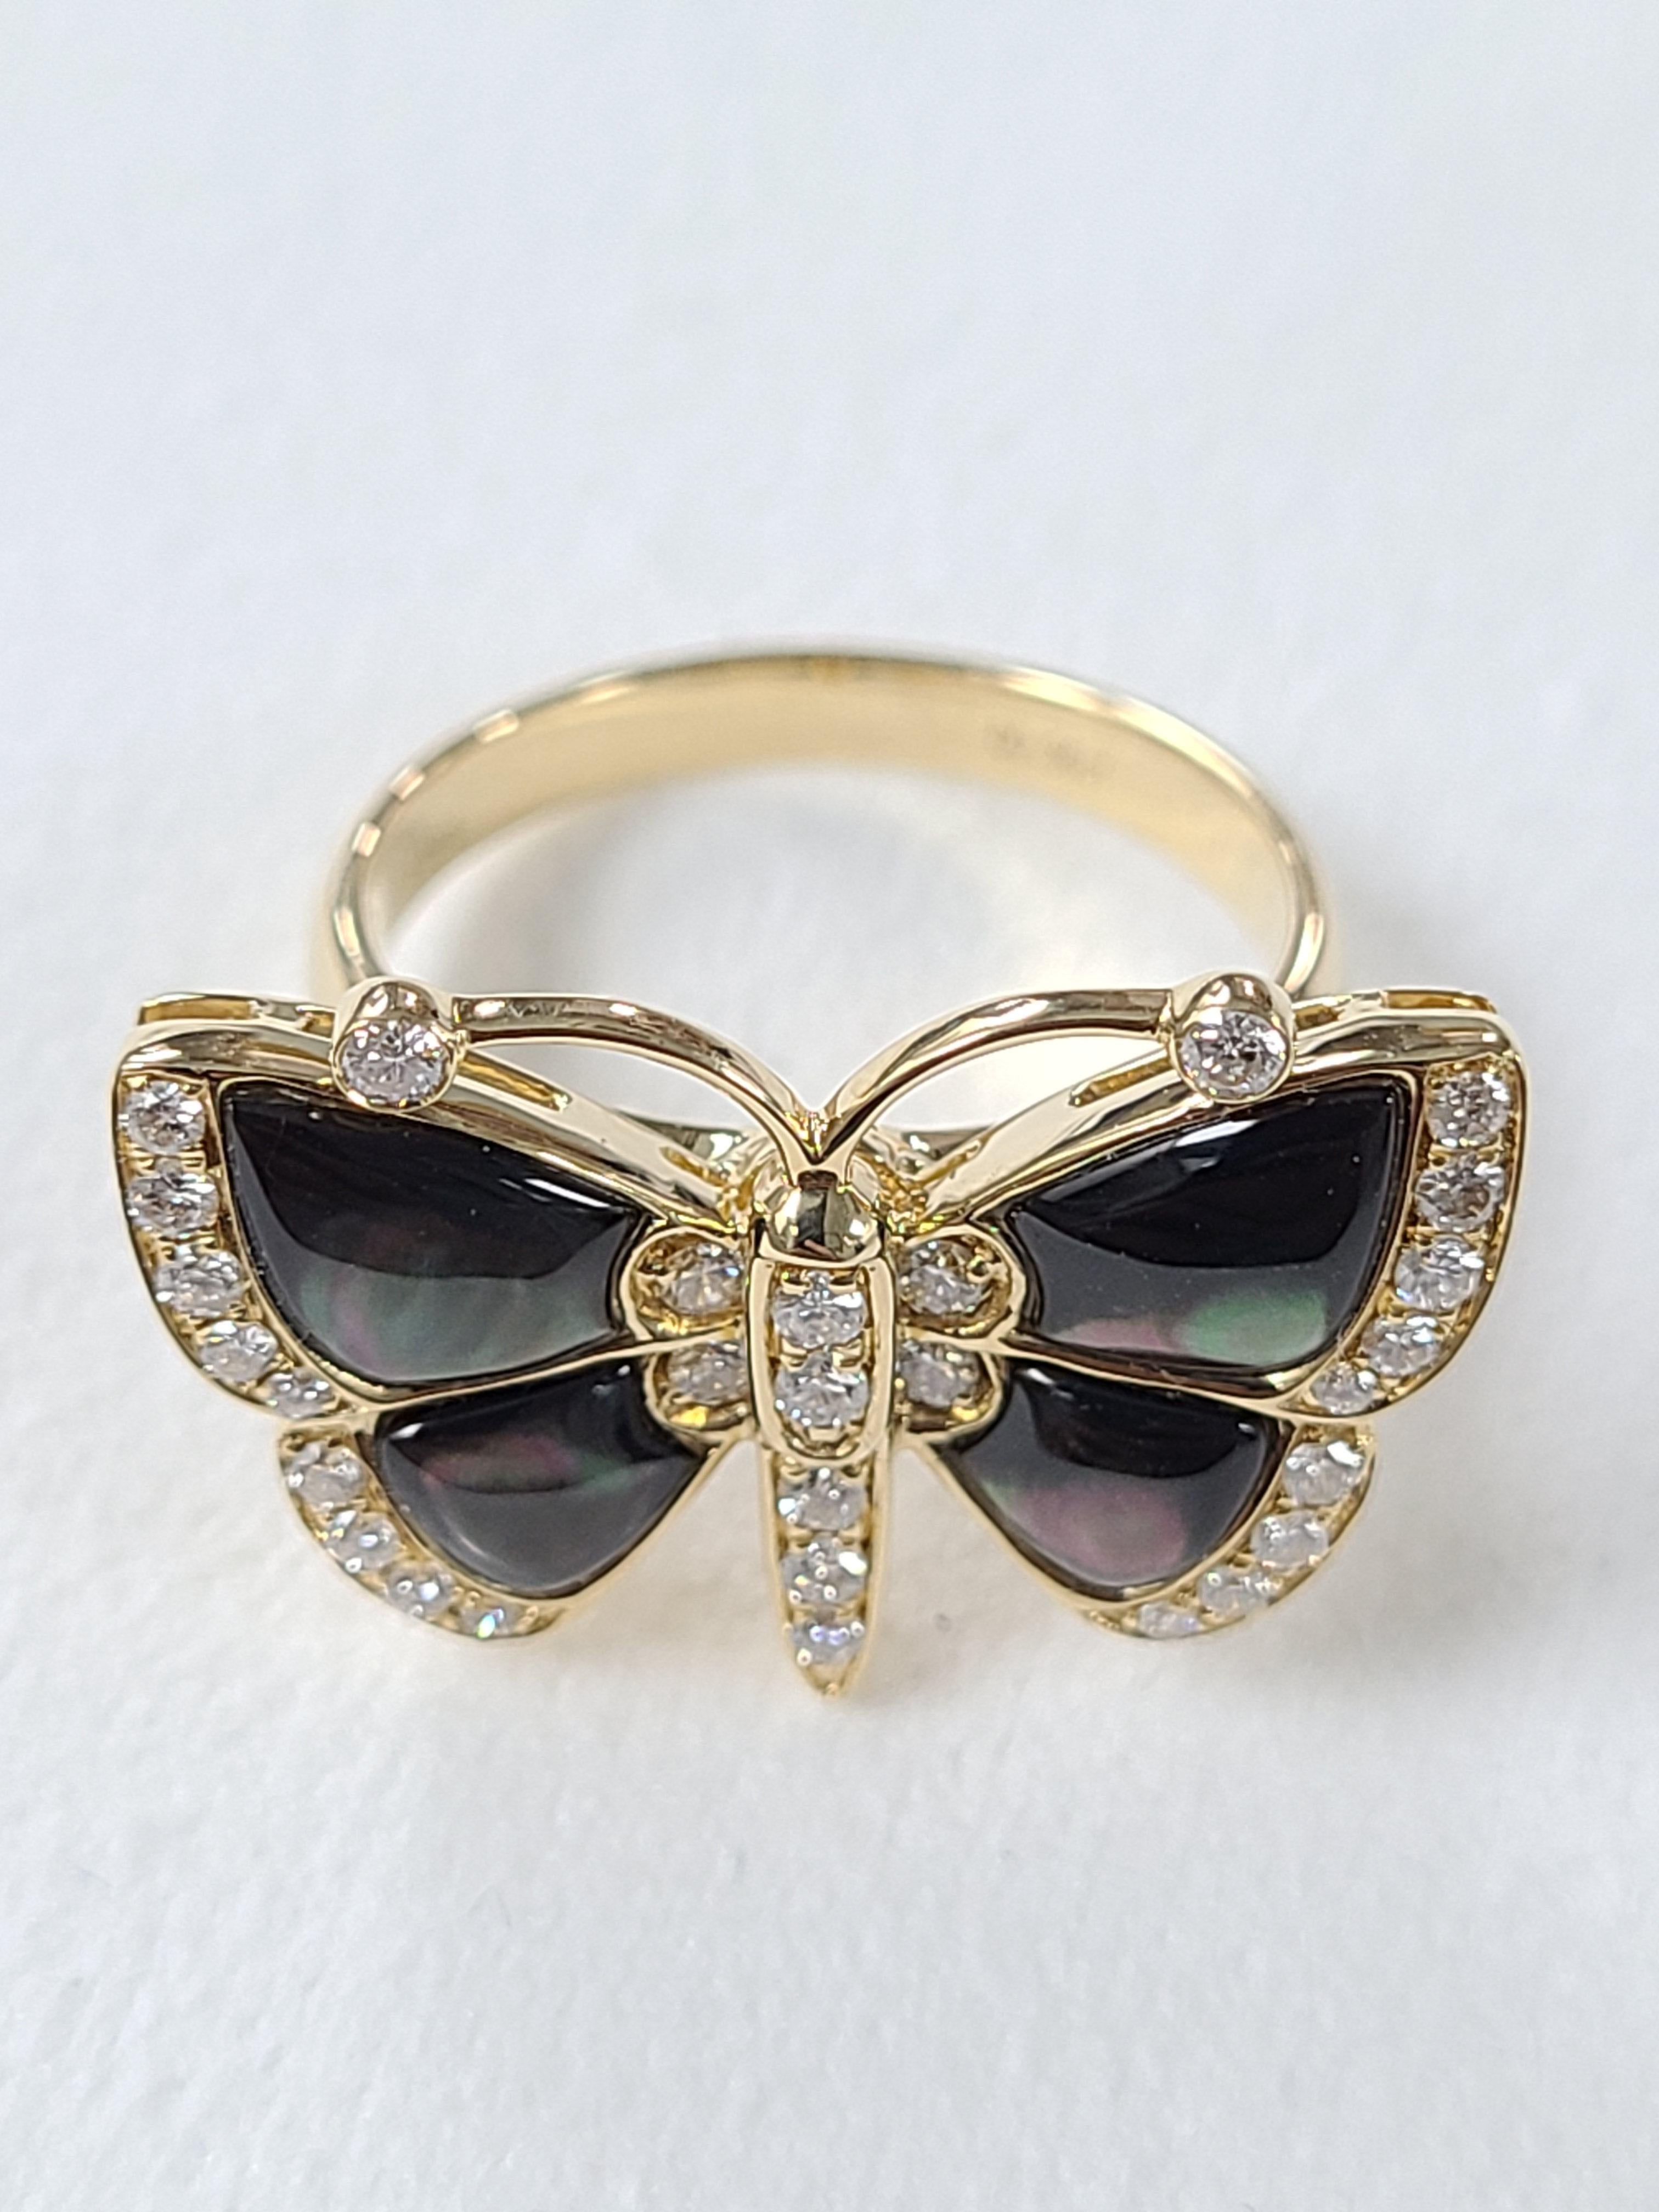 A Gorgeous butterfly ring made in 18K gold and diamond with M.O.P . The diamond weight in the ring is .35 carats and gross weight of the ring is 6.3 grams. Ring dimensions in cm 1 x 2 x 2 ( L X W X H ). US size 6 1/2.